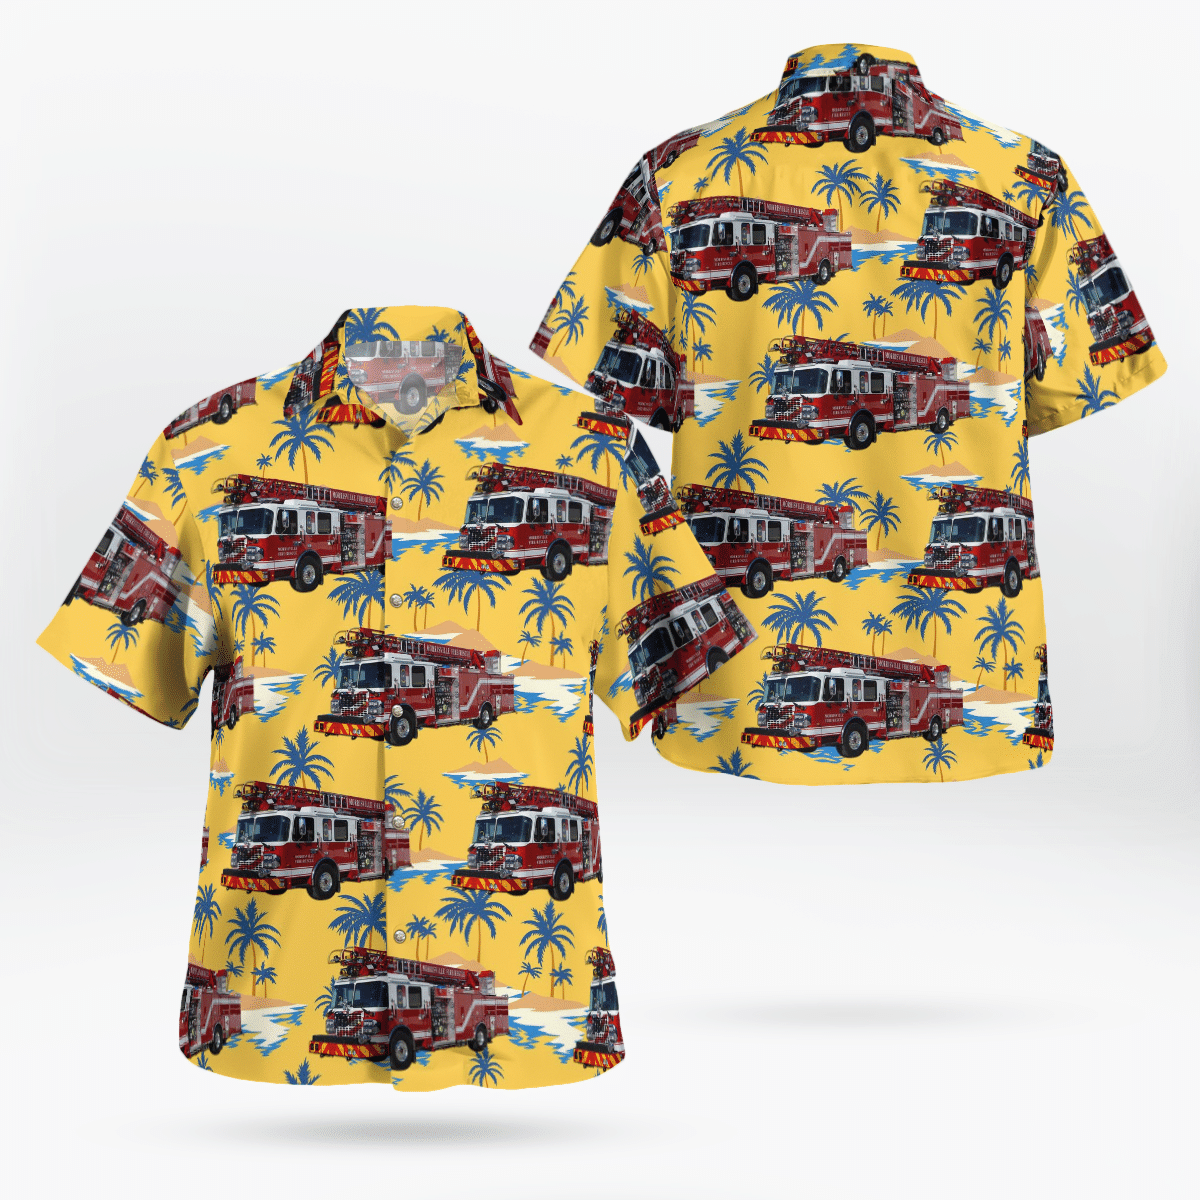 If you want to be noticed, wear These Trendy Hawaiian Shirt 94